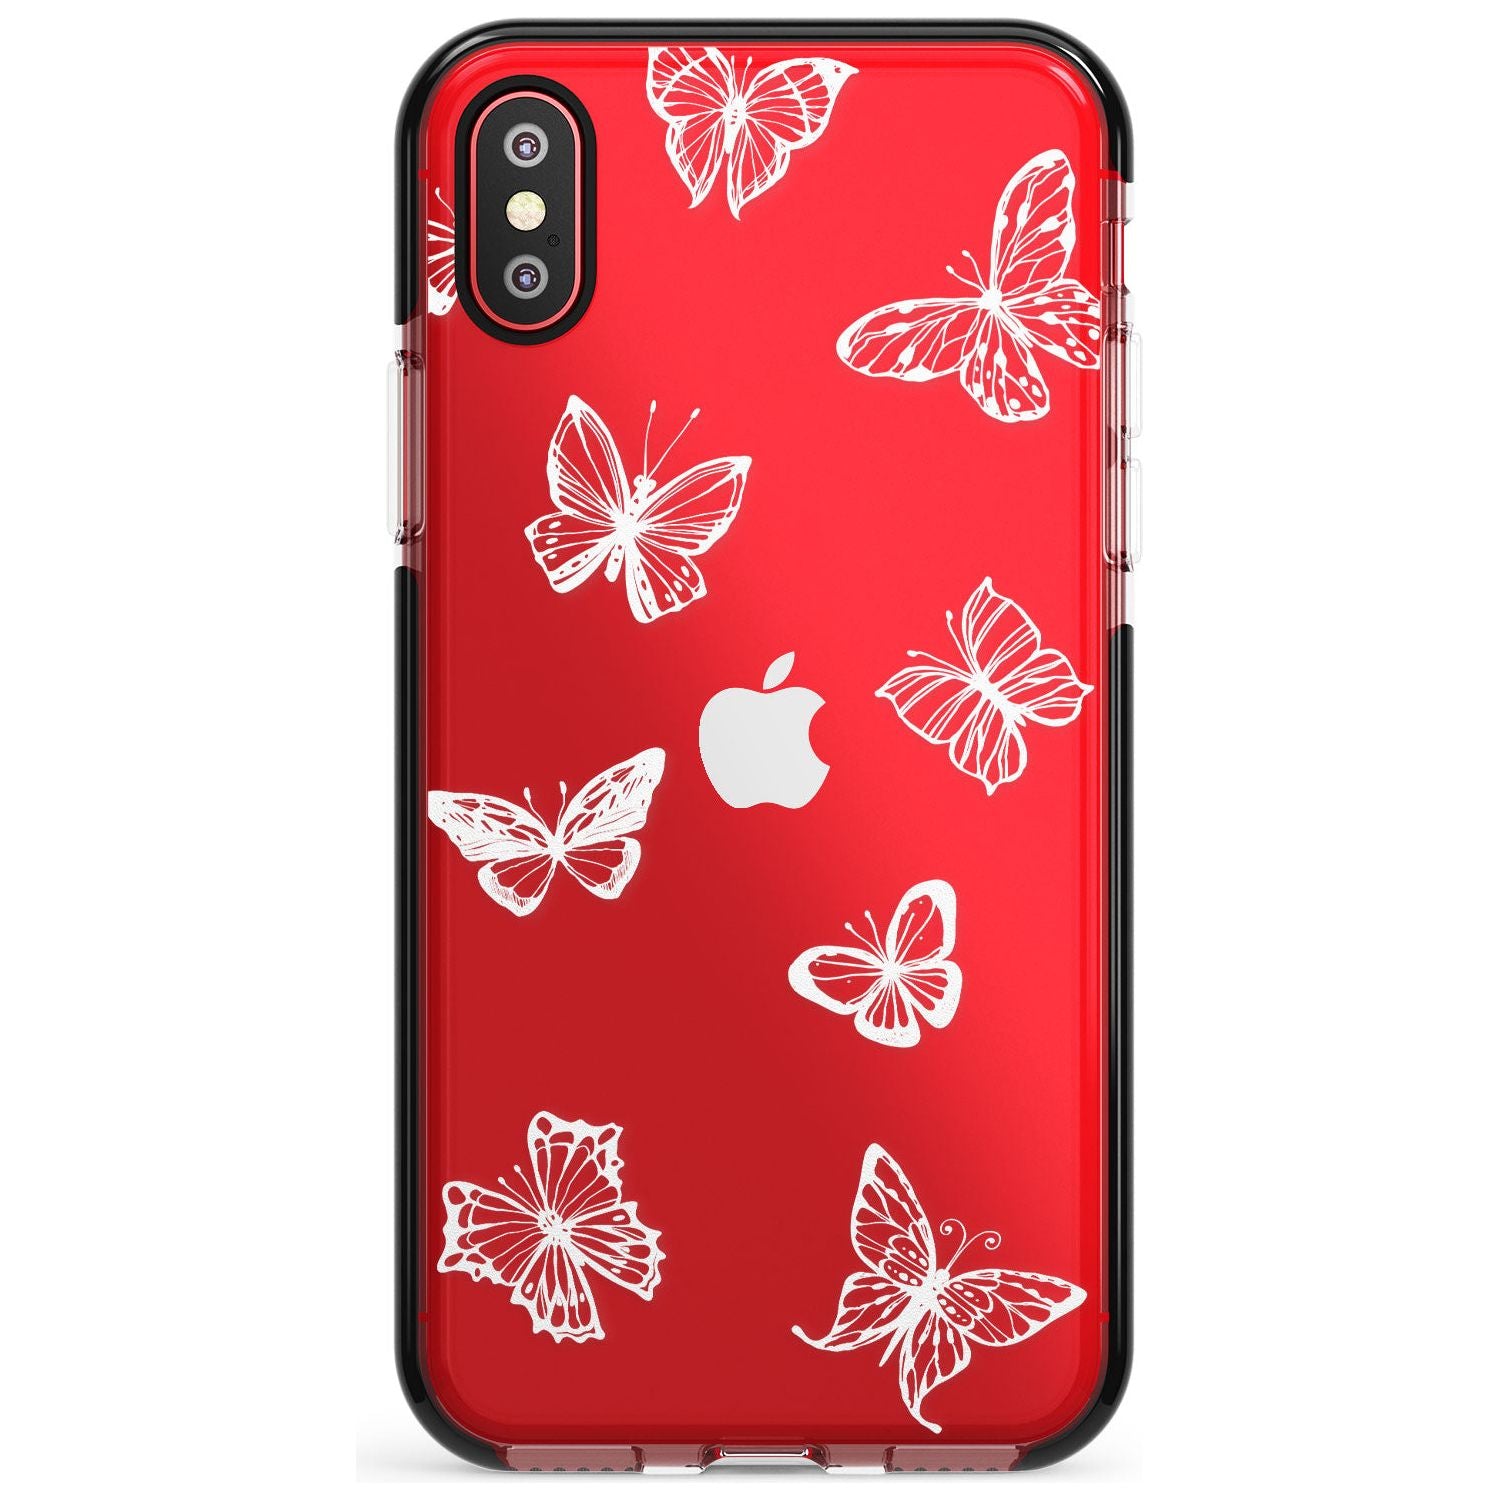 White Butterfly Line Pattern Black Impact Phone Case for iPhone X XS Max XR